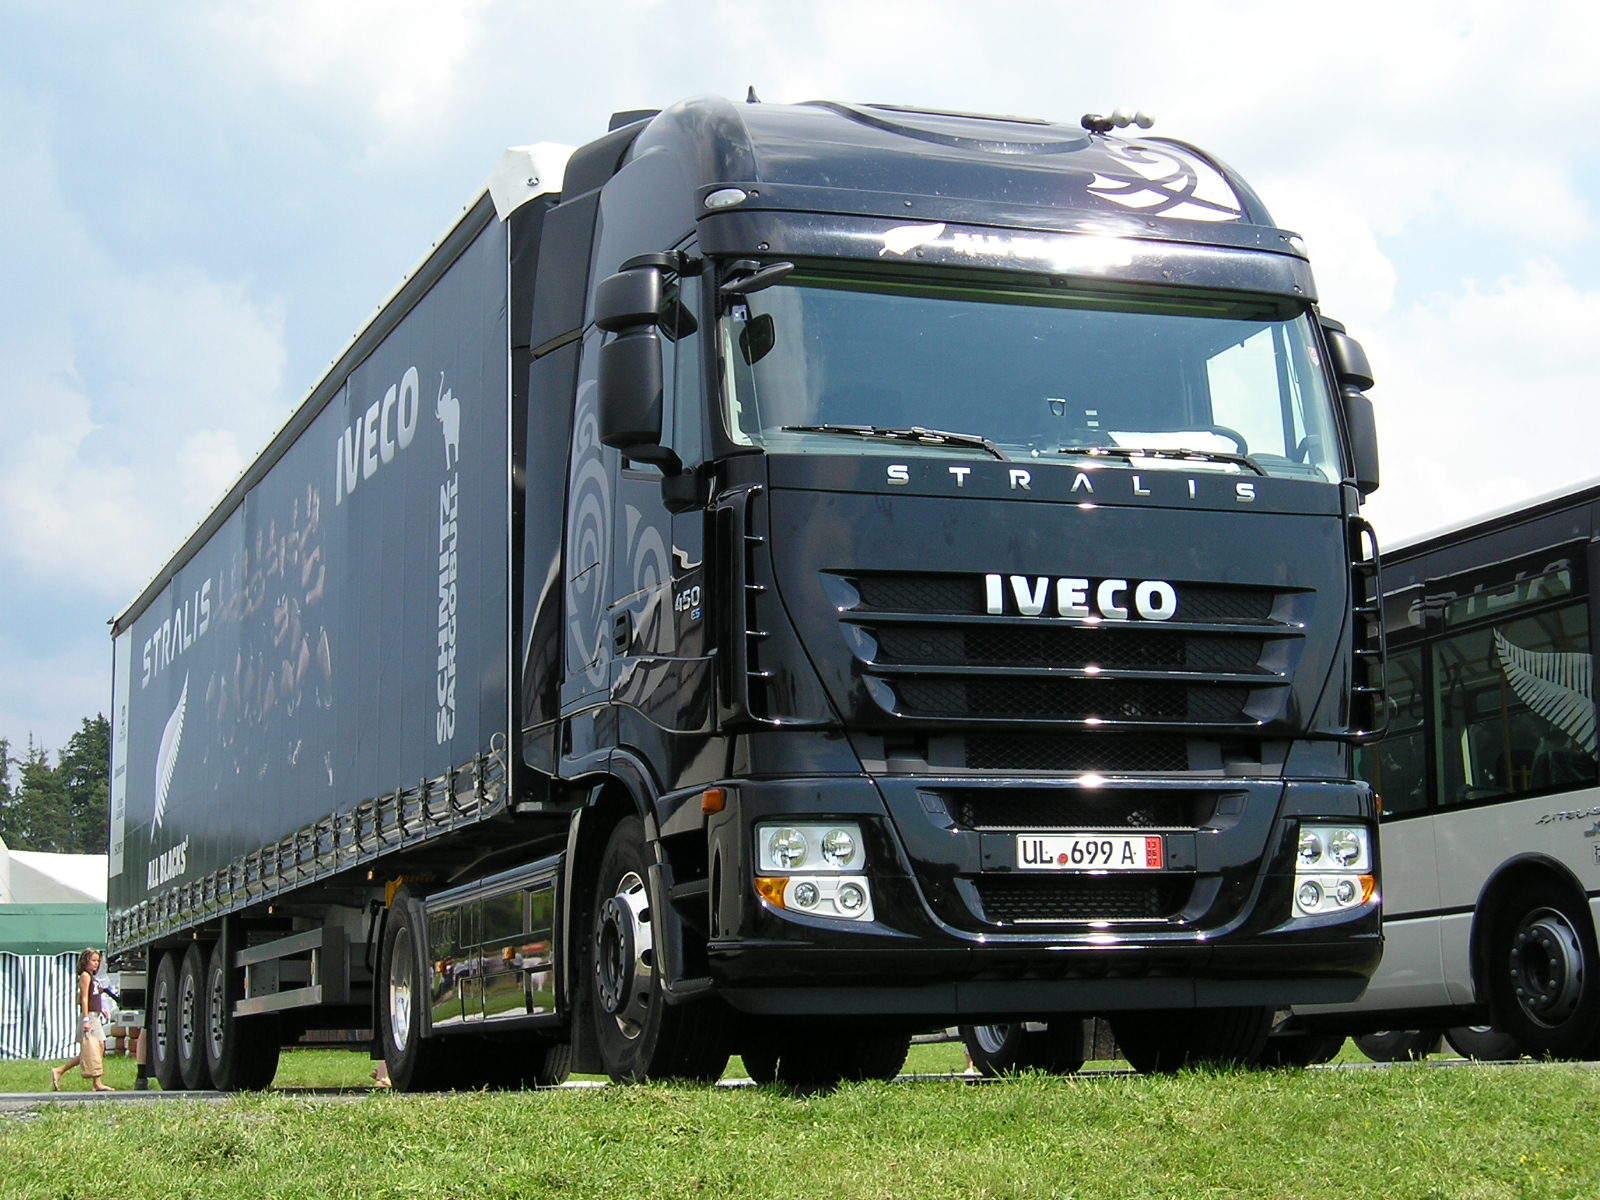 Fiat Group's arm Iveco scouting local partner to re-enter truck ...